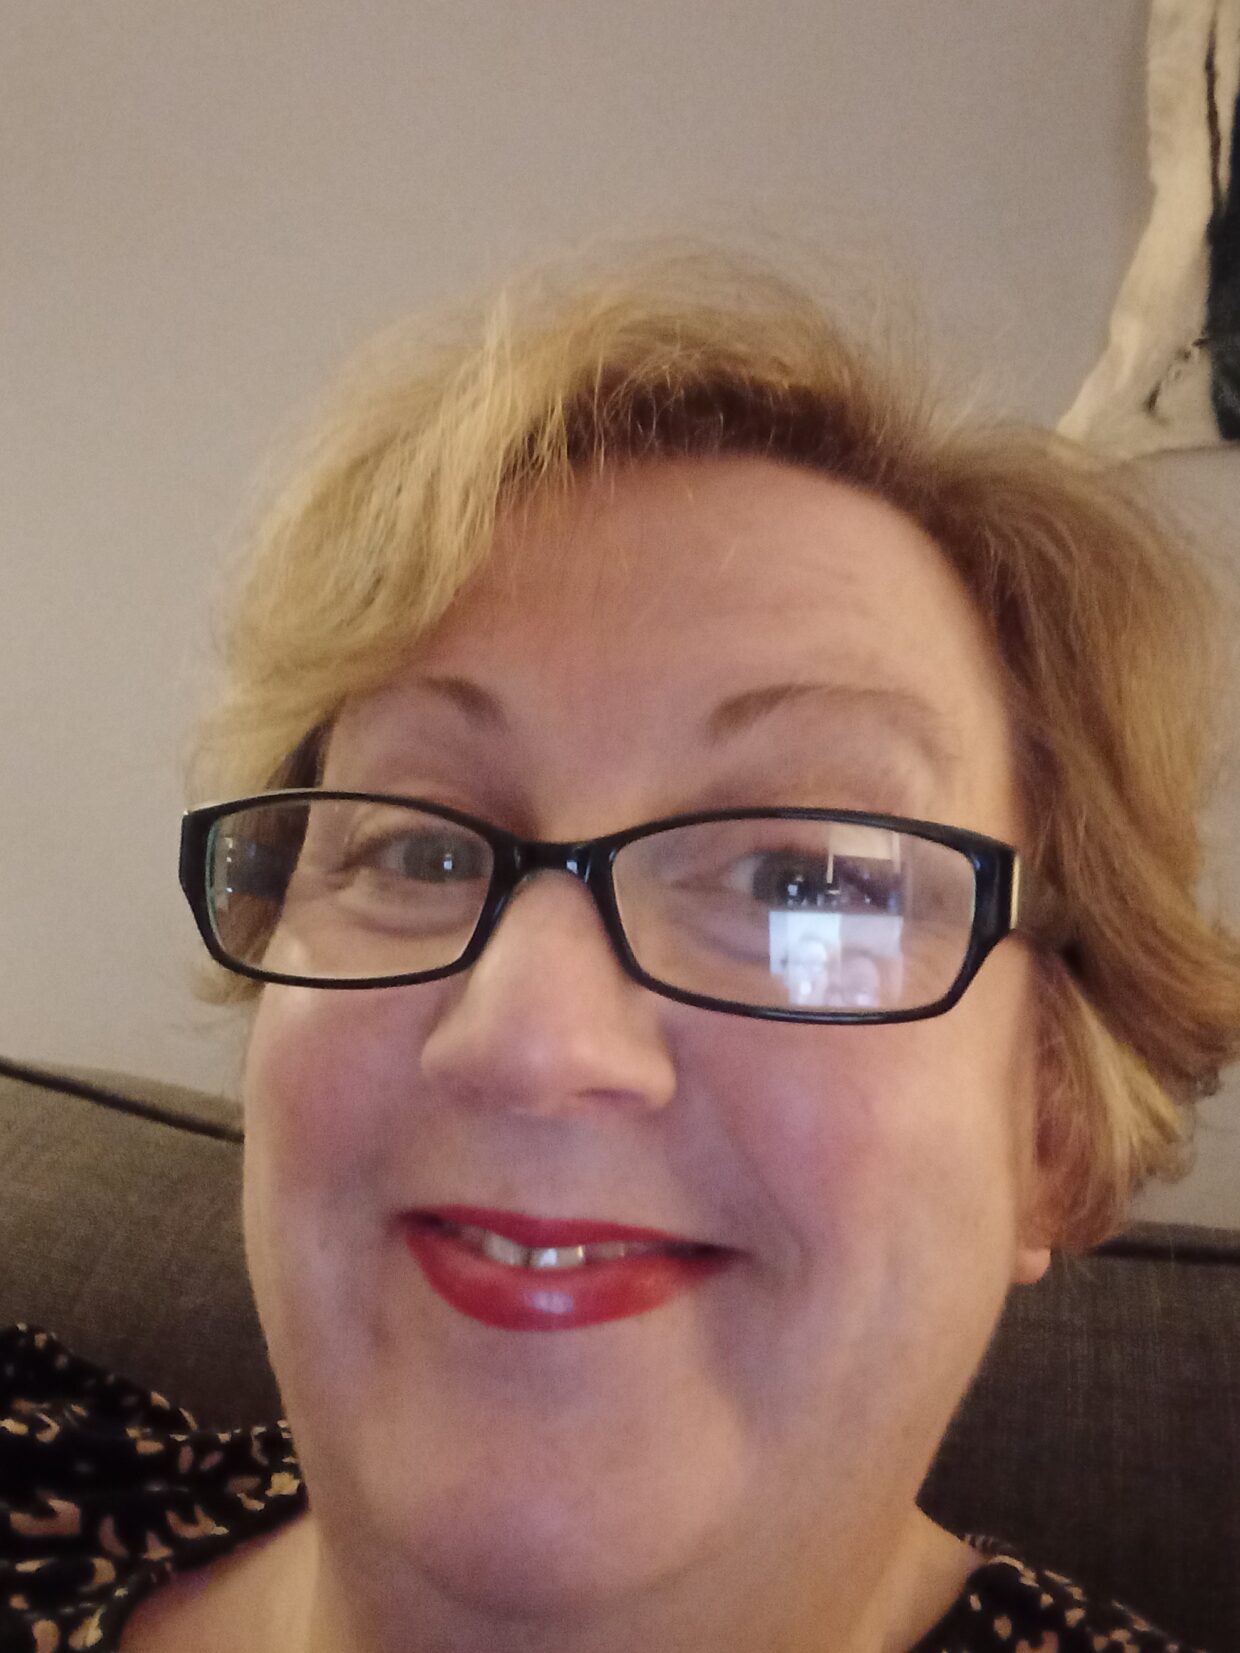 Selfie of Elaine smiling at the camera. Elaine has short blonde hair, is wearing square, black-framed glasses and red lipstick.